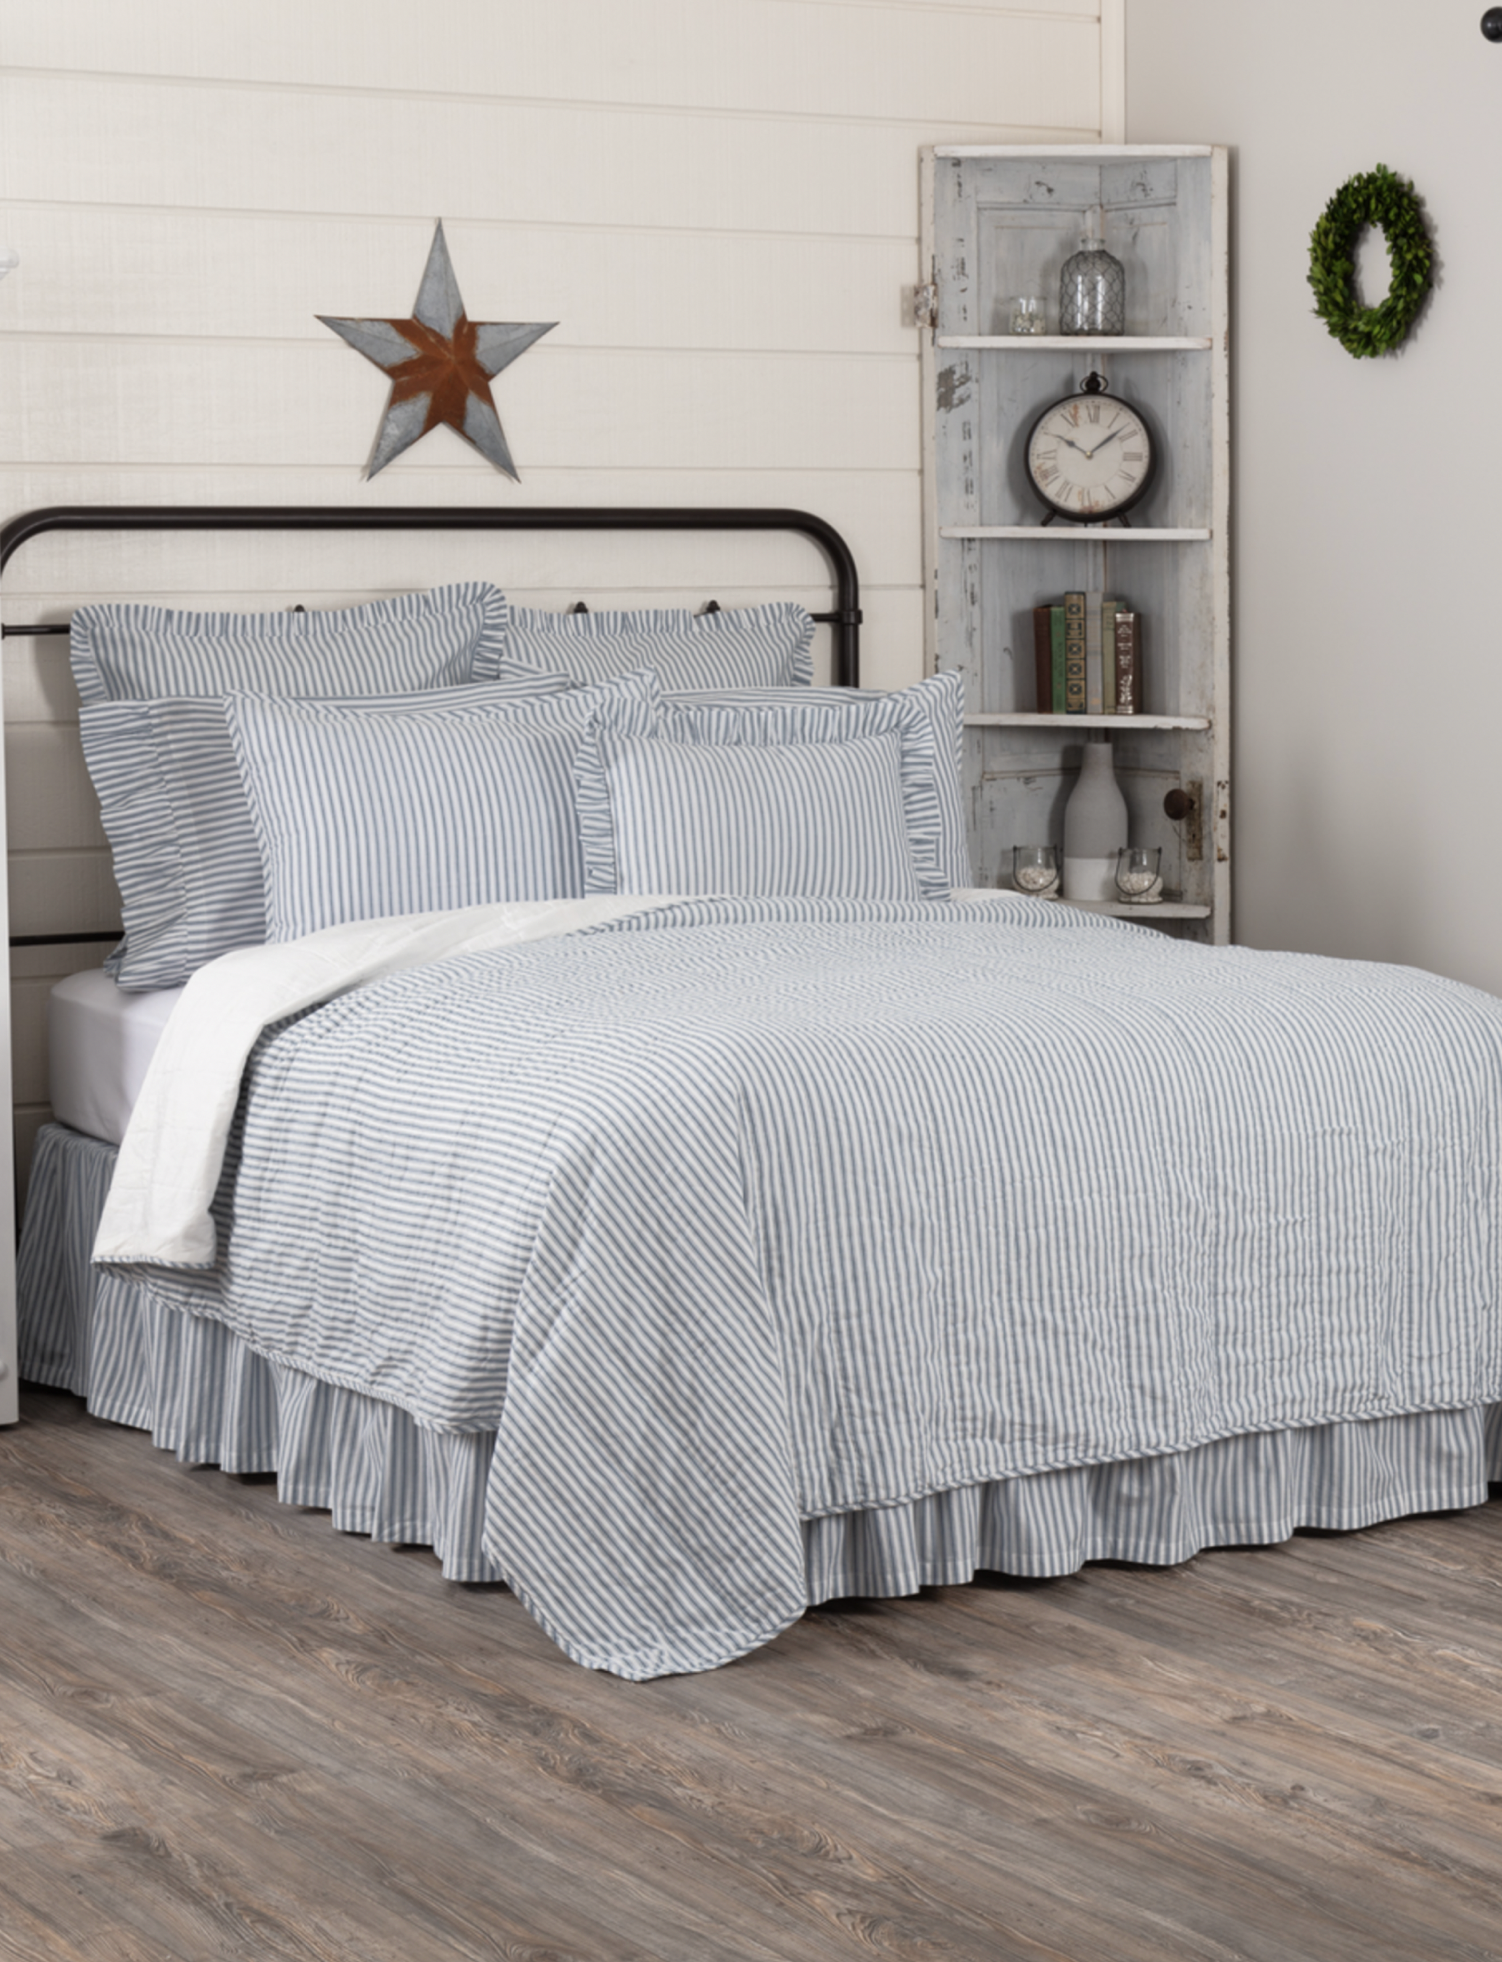 SAWYER MILL King Bed Skirt Farmhouse Country Charcoal Gray/Creme Stripe VHC 